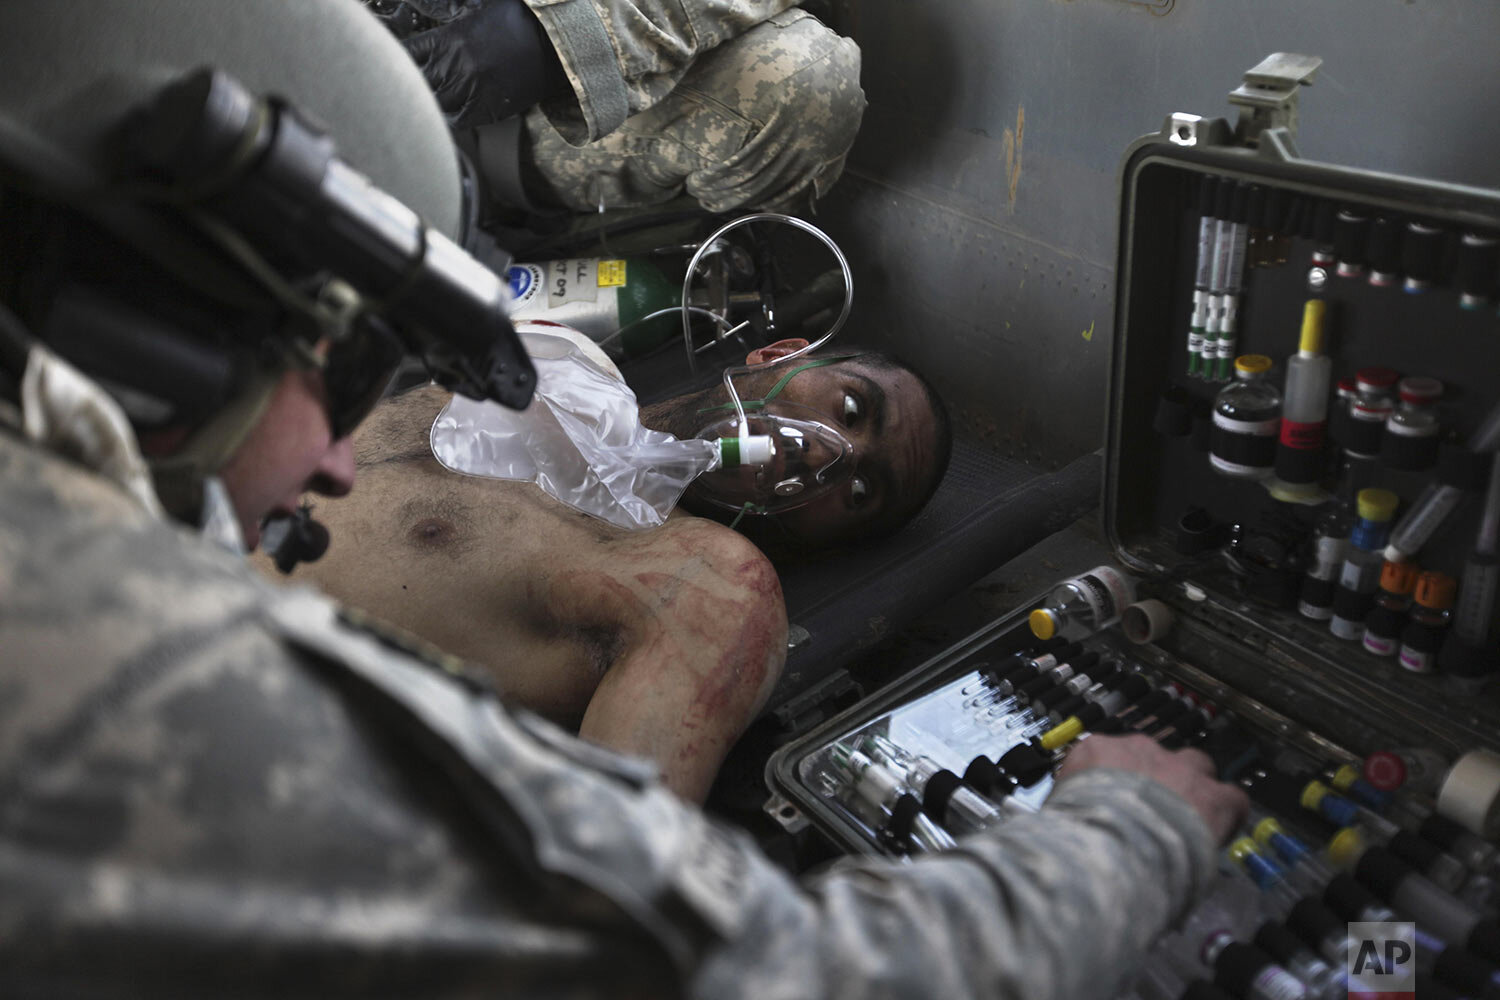  Airborne in a U.S. Army Task Force Pegasus helicopter, U.S. Army Staff Sgt. and flight medic Robert B. Cowdrey, of La Junta, Colo., gives medical care to an Afghan National Army soldier with a gunshot wound, during a medevac mission over Marjah, Hel